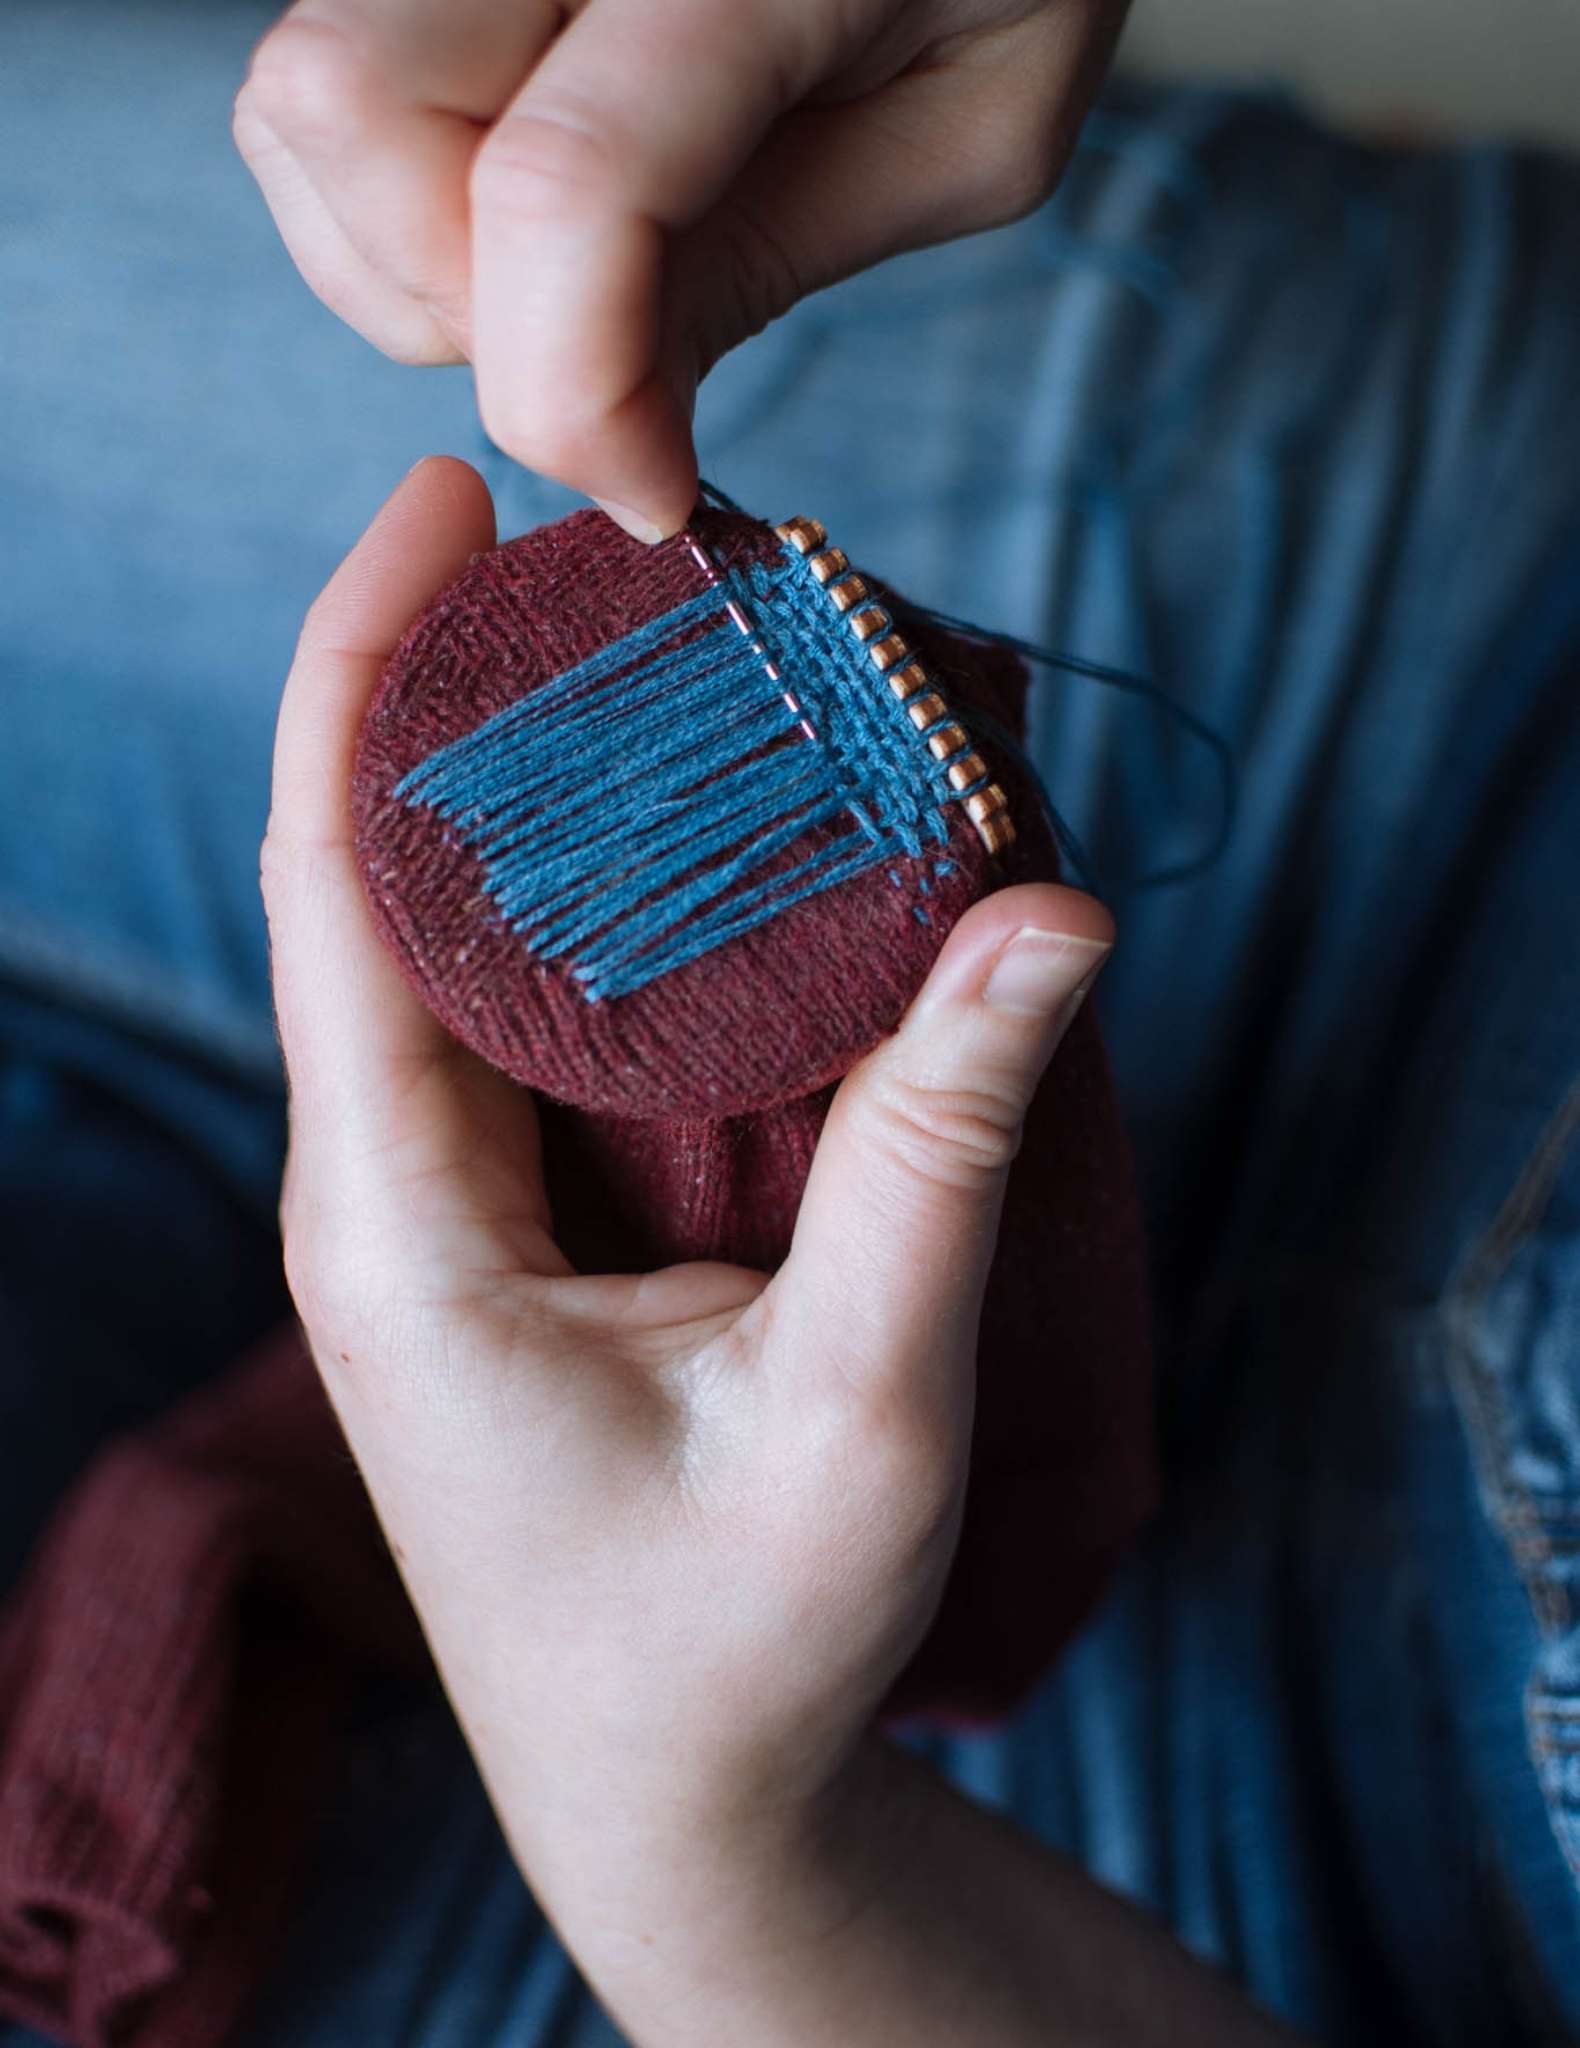 A model holds a burgundy sock while darning it with teal blue thread, using a wooden darning loom.